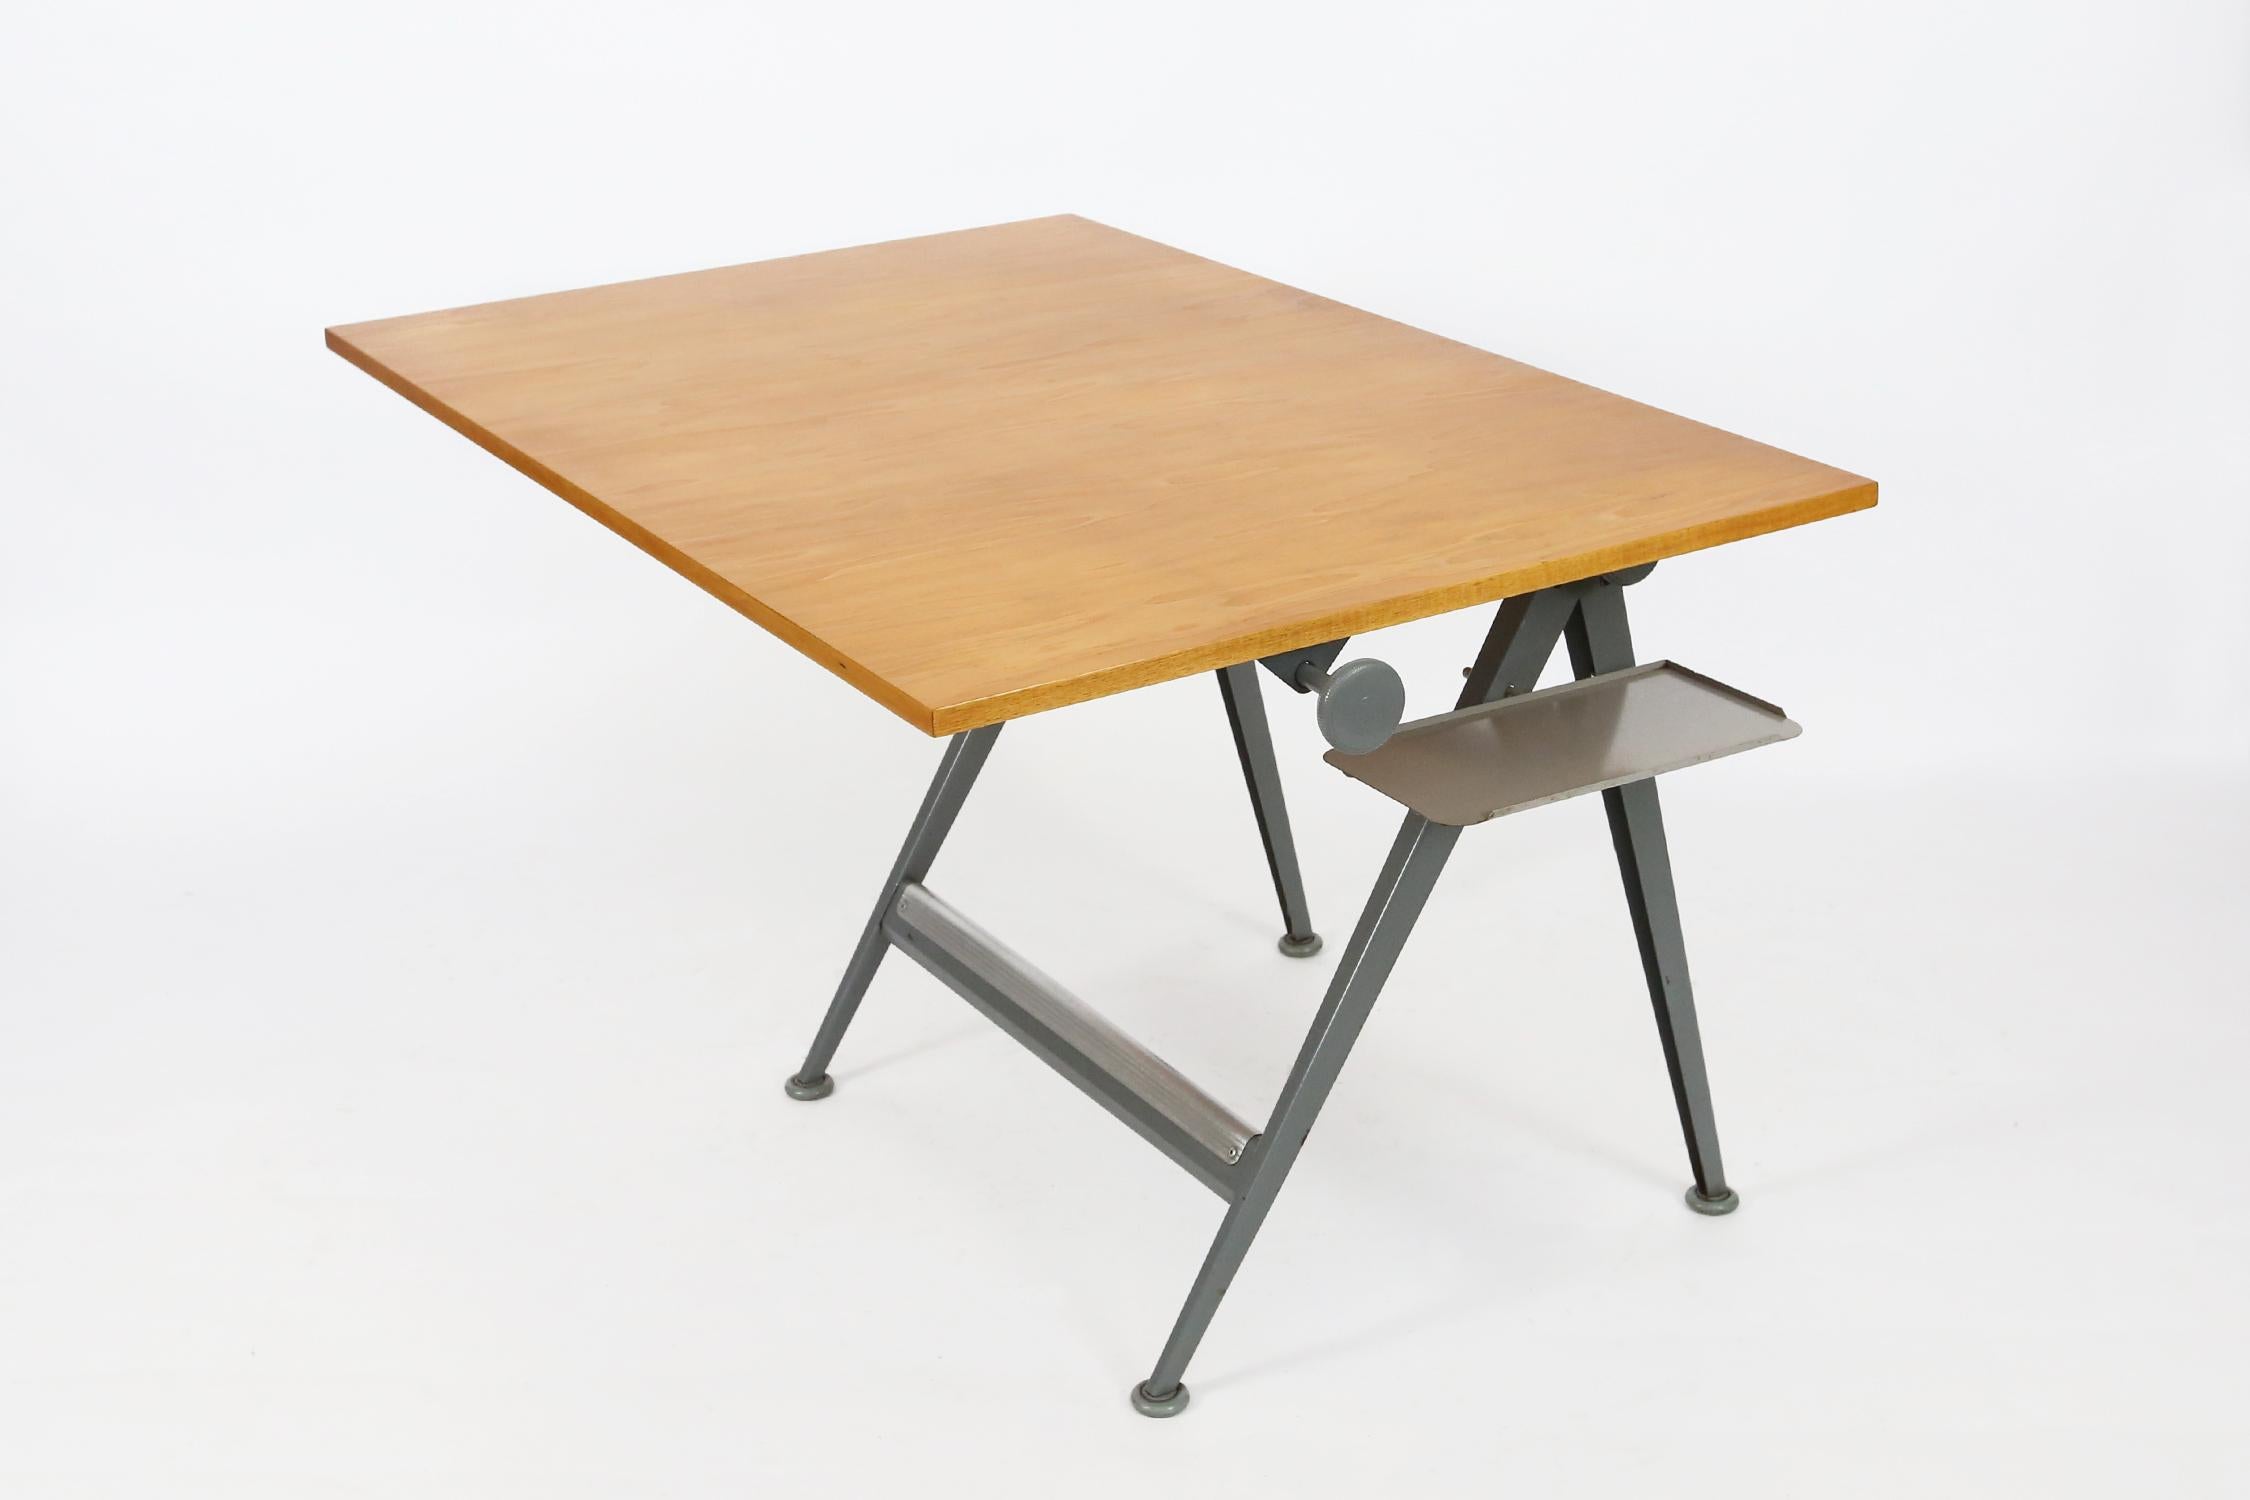 Steel Architect Drafting Table by Friso Kramer and Wim Rietveld Ahrend Cirkel, 1963